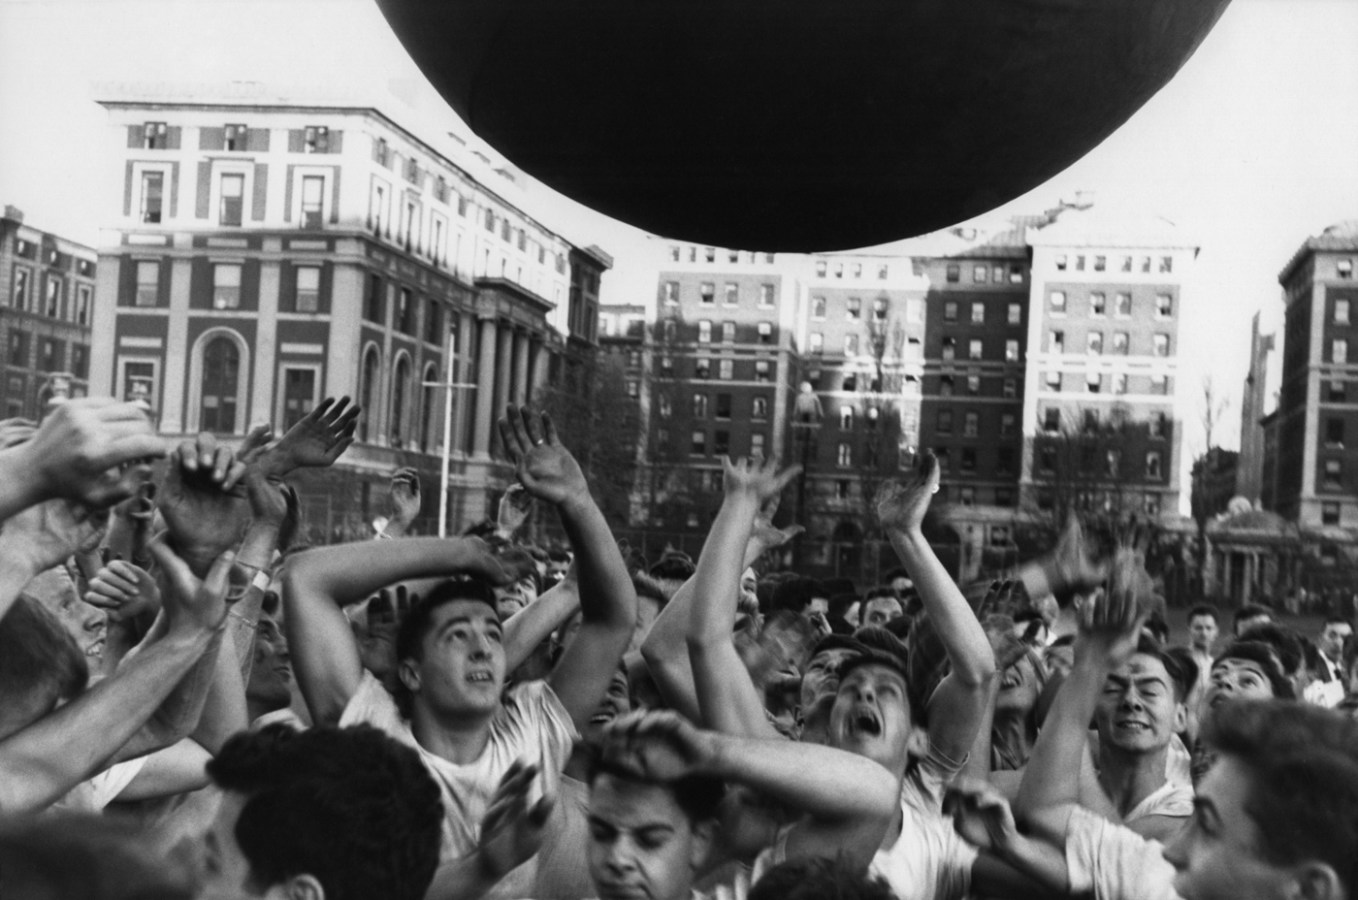 Black-and-white photograph of a crowd of young men with arms raised towards a round object floating above them